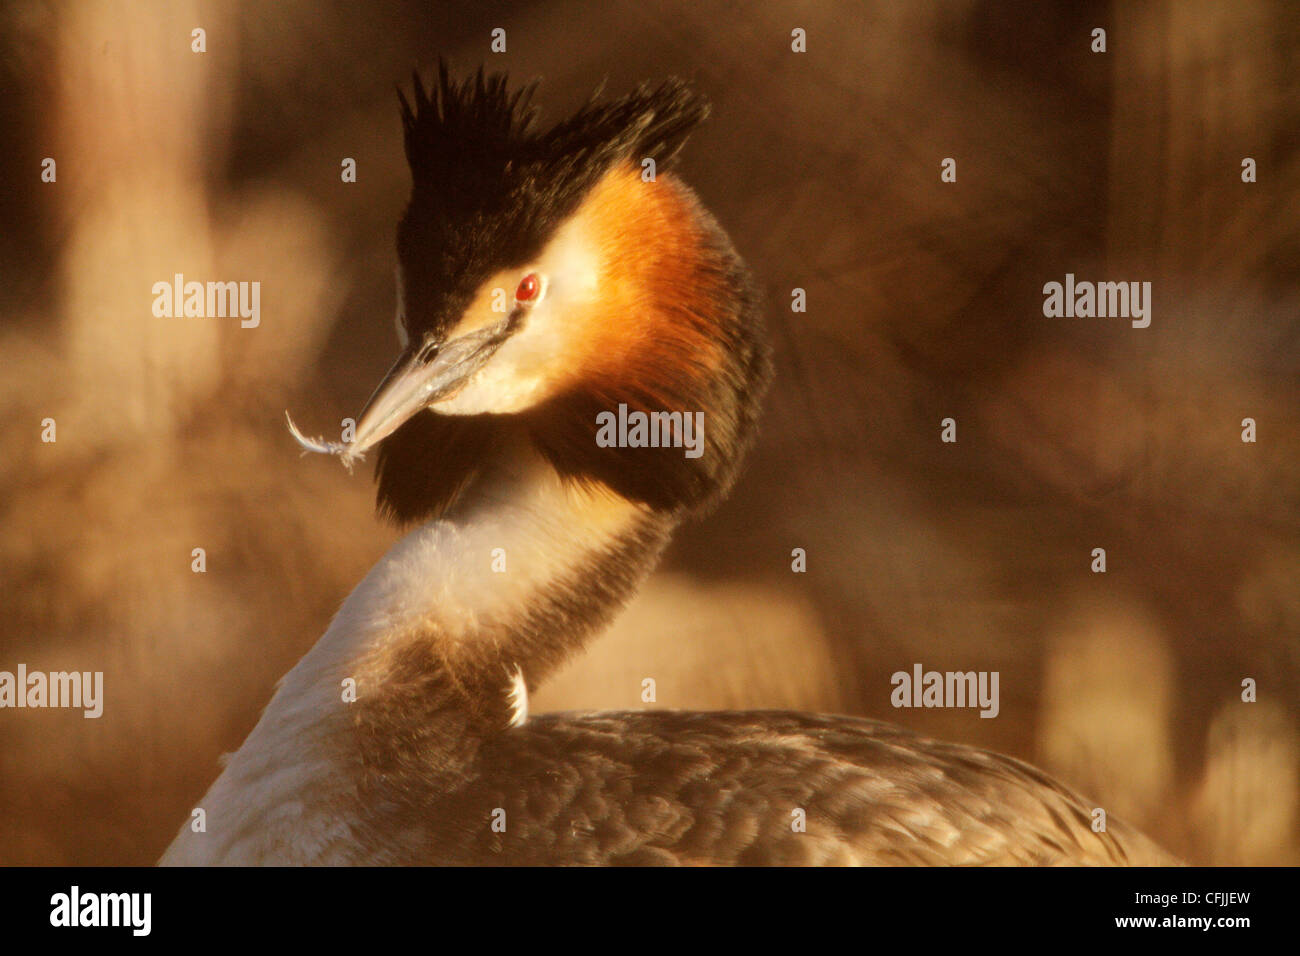 Great crested grebe portrait, spring, Norway Stock Photo